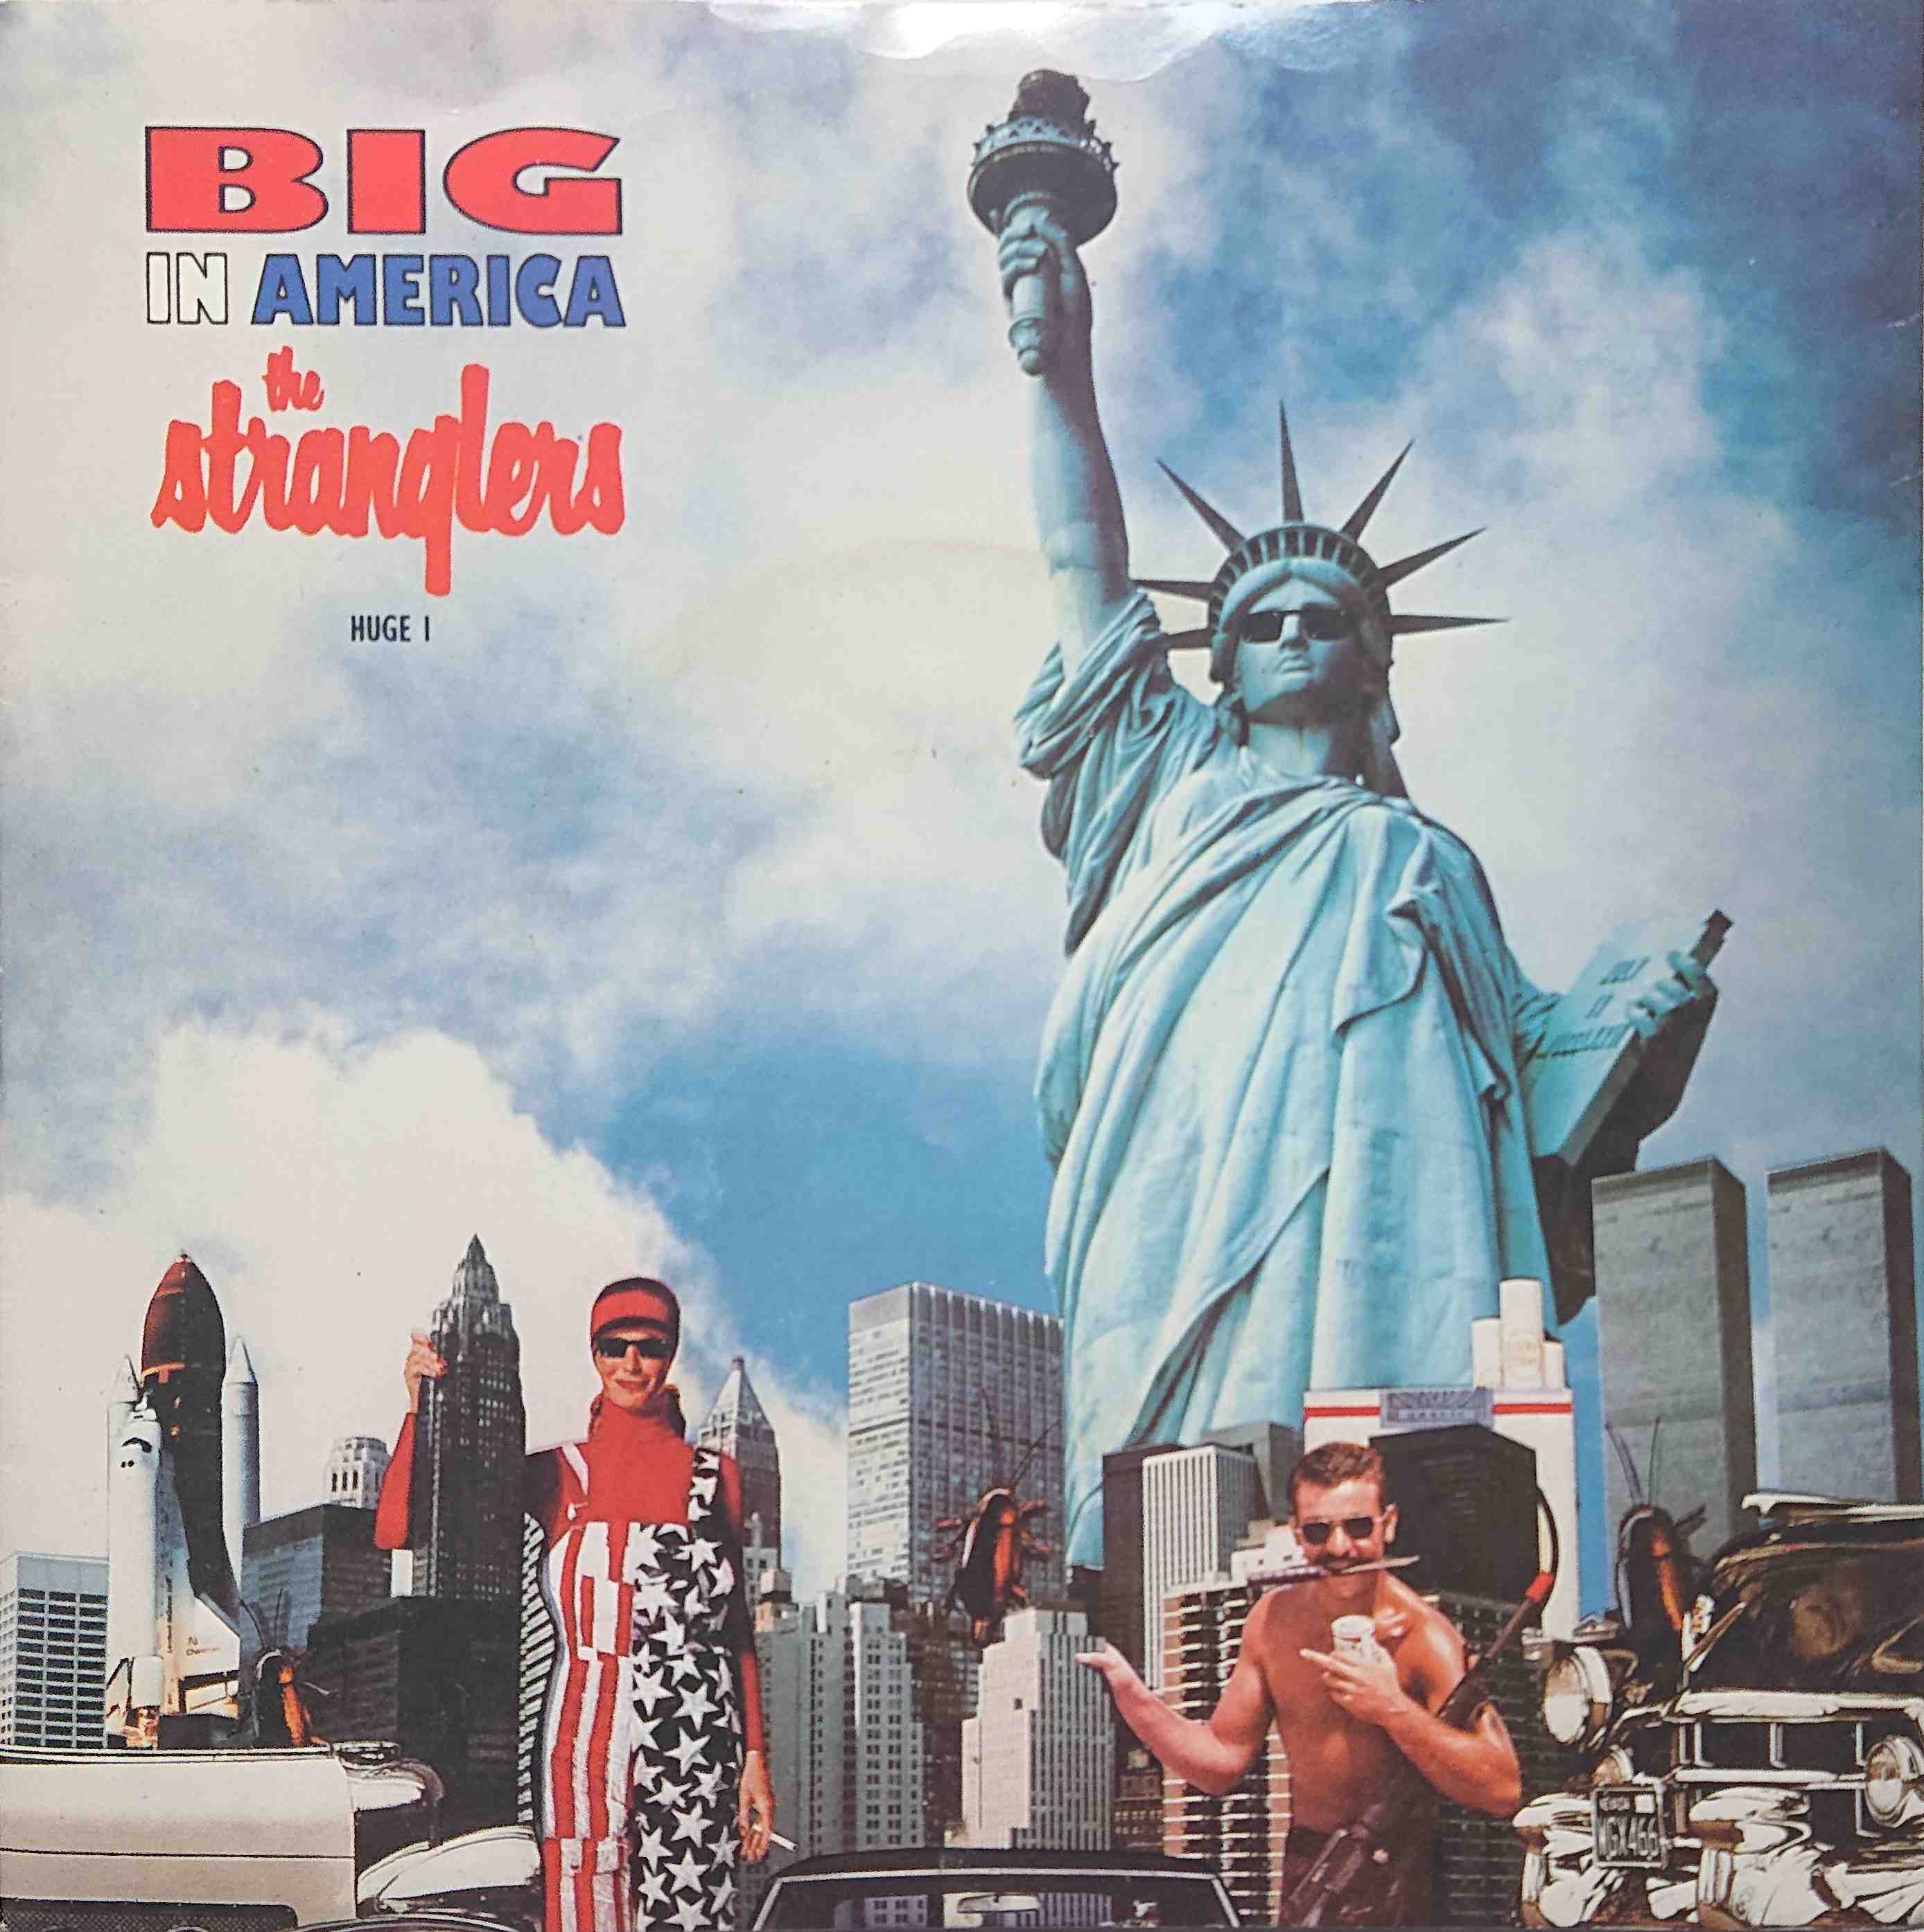 Picture of Big in America by artist The Stranglers from The Stranglers singles